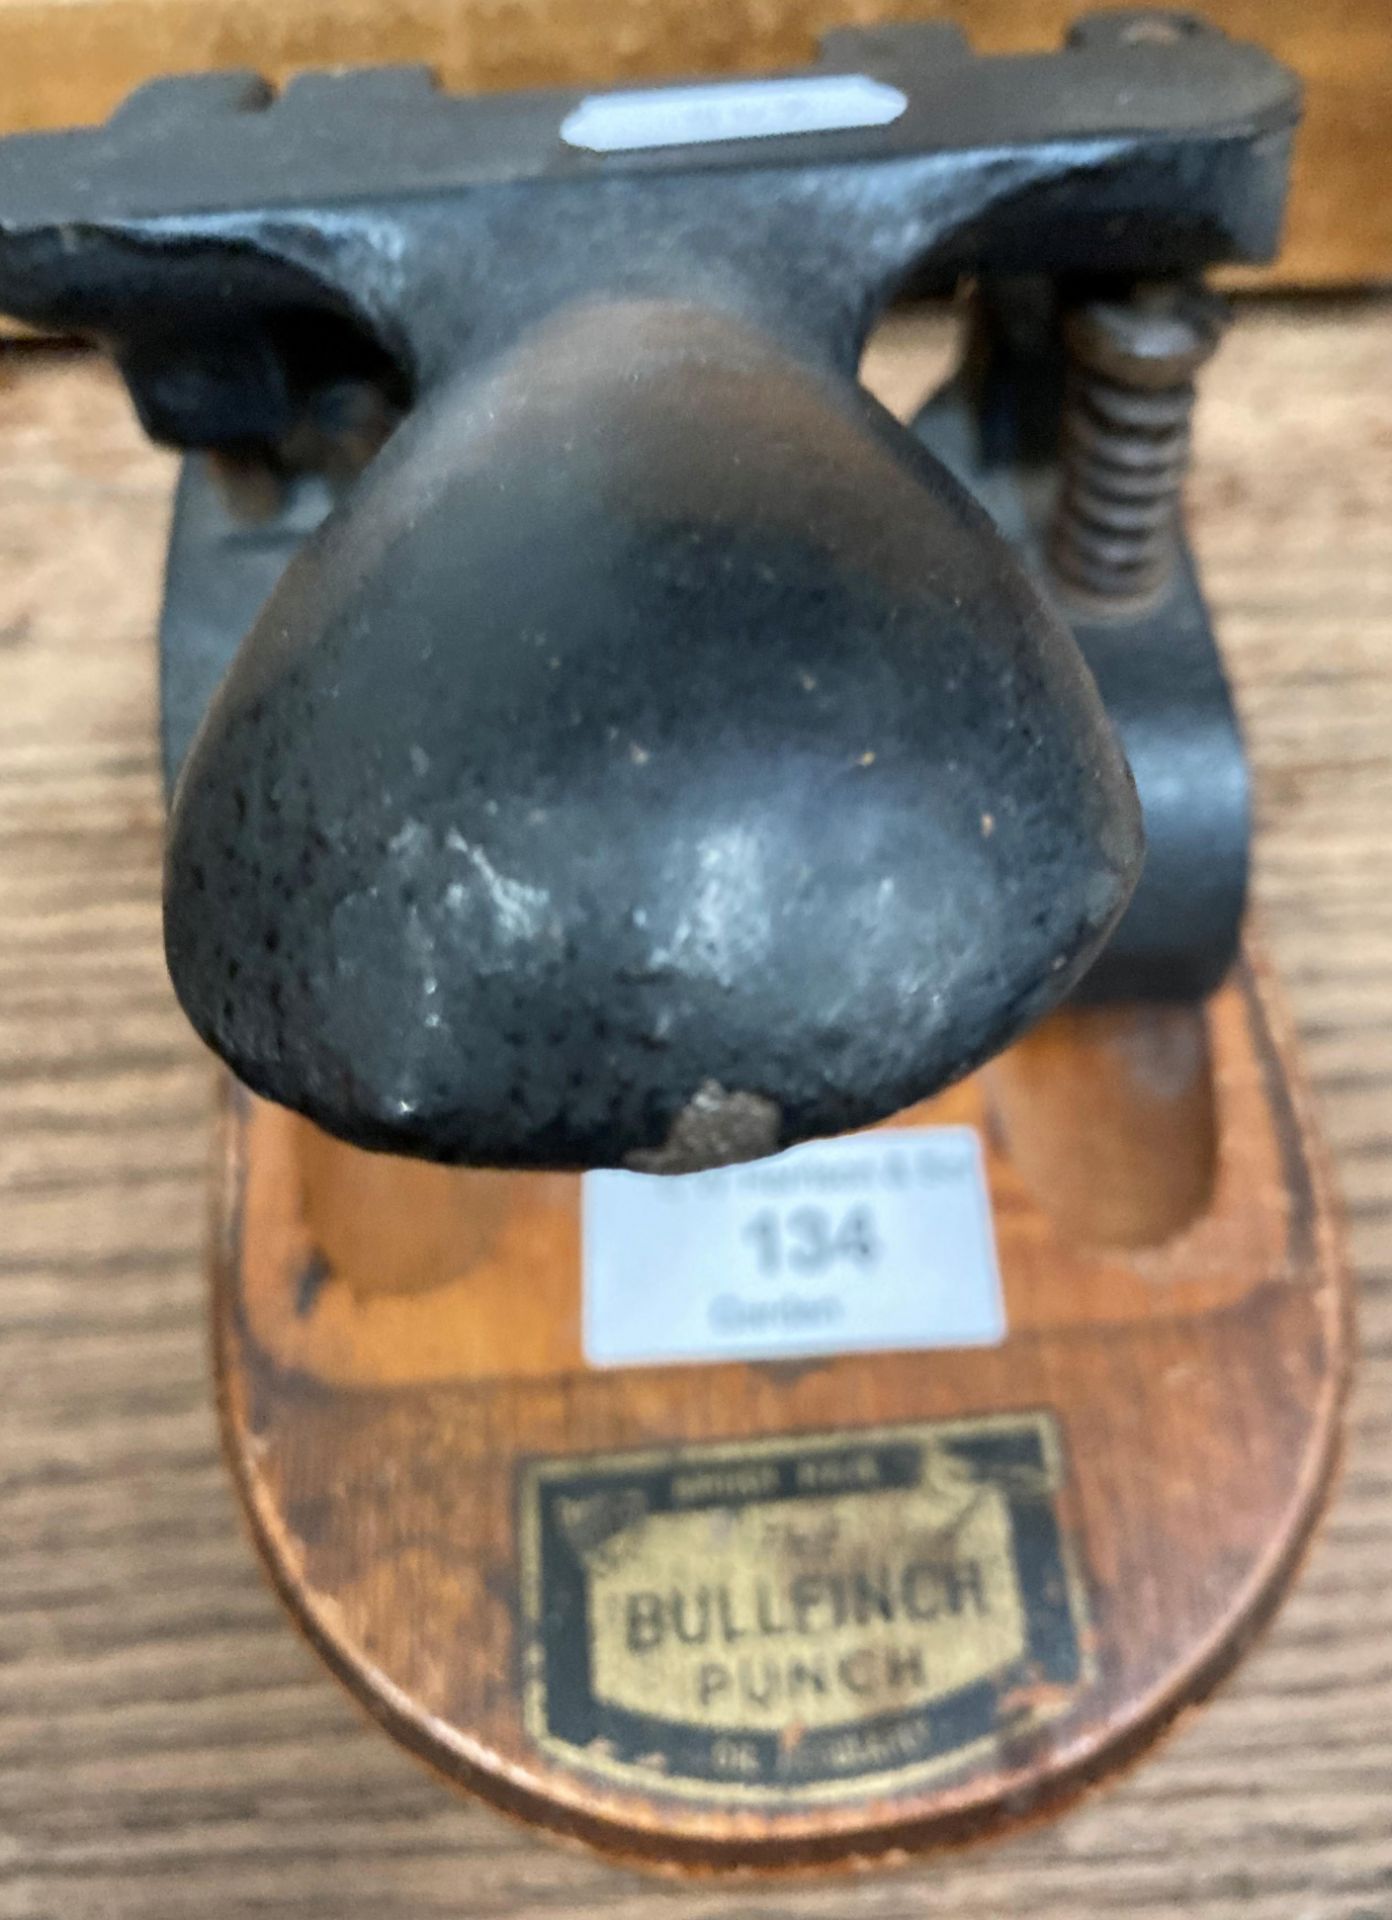 The Bullfinch manual desk punch (saleroom location: DT) - please note this lot is subject to VAT